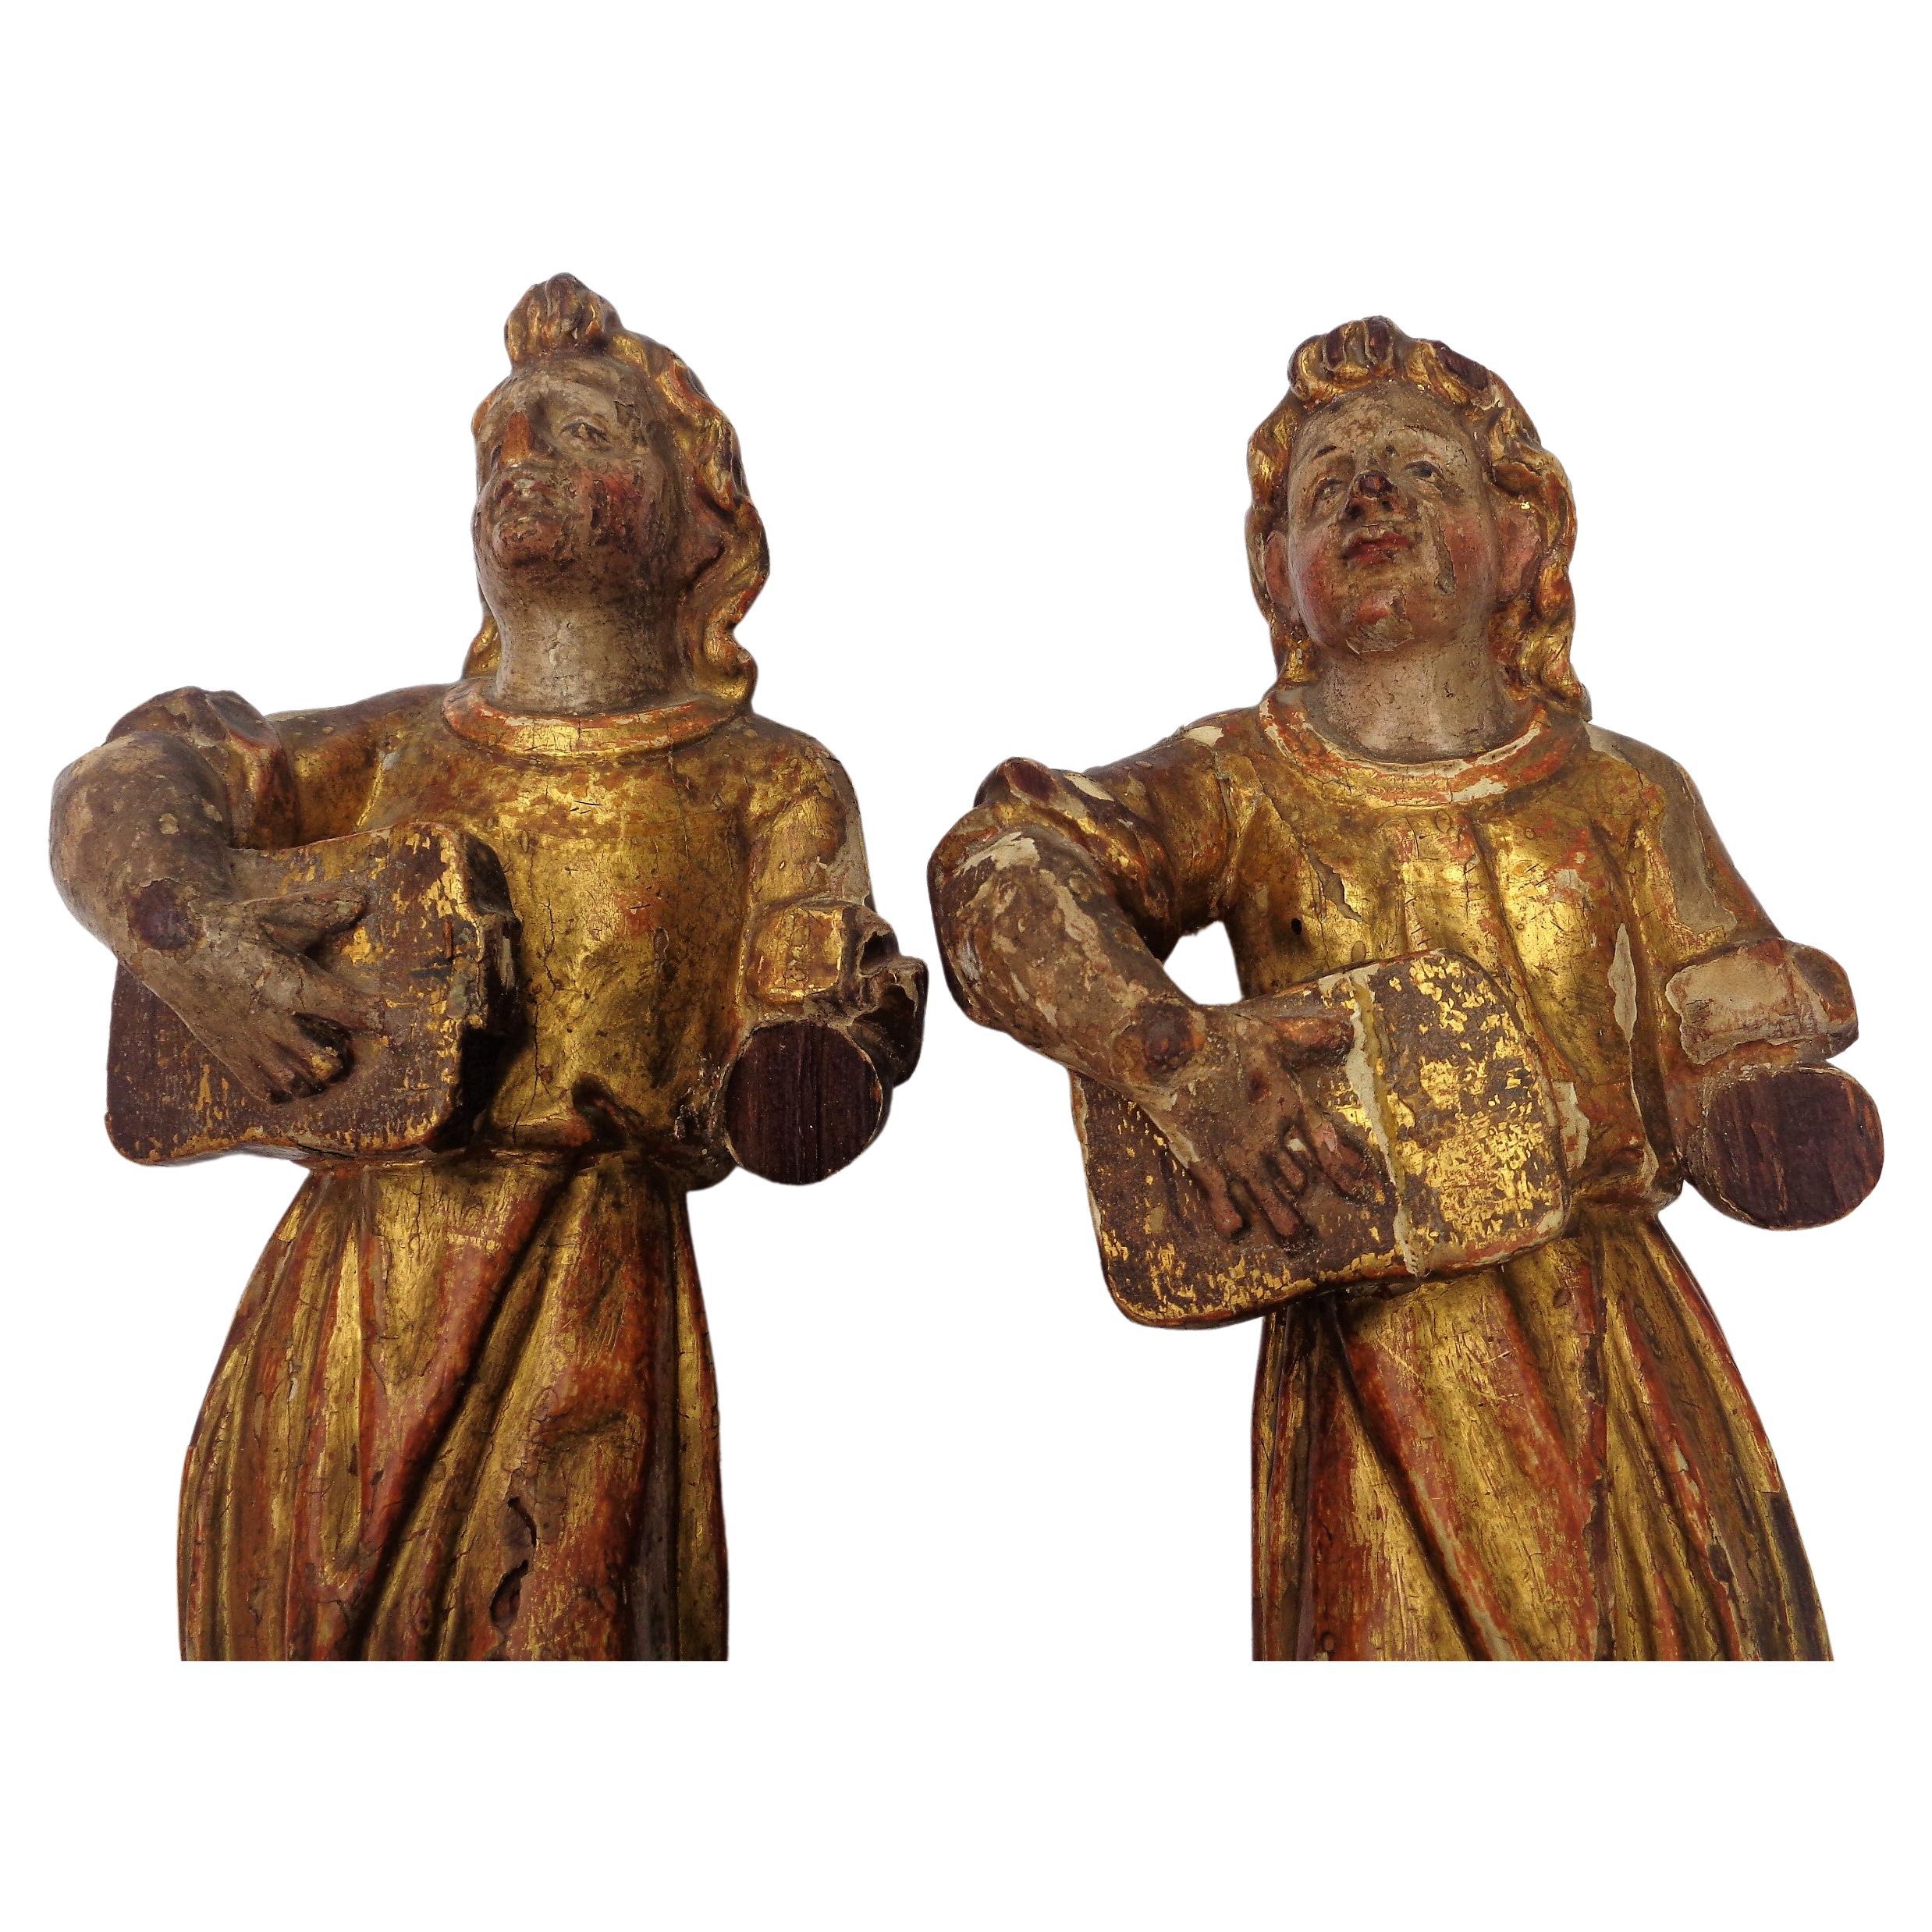 Pair of 18th century hand carved Italian angel figures w/ lutes. Beautifully aged original gilded and polychrome painted surface w/ areas of underlying red bole and gesso showing. Exceptionally great looking finely detailed 250 year old carvings.